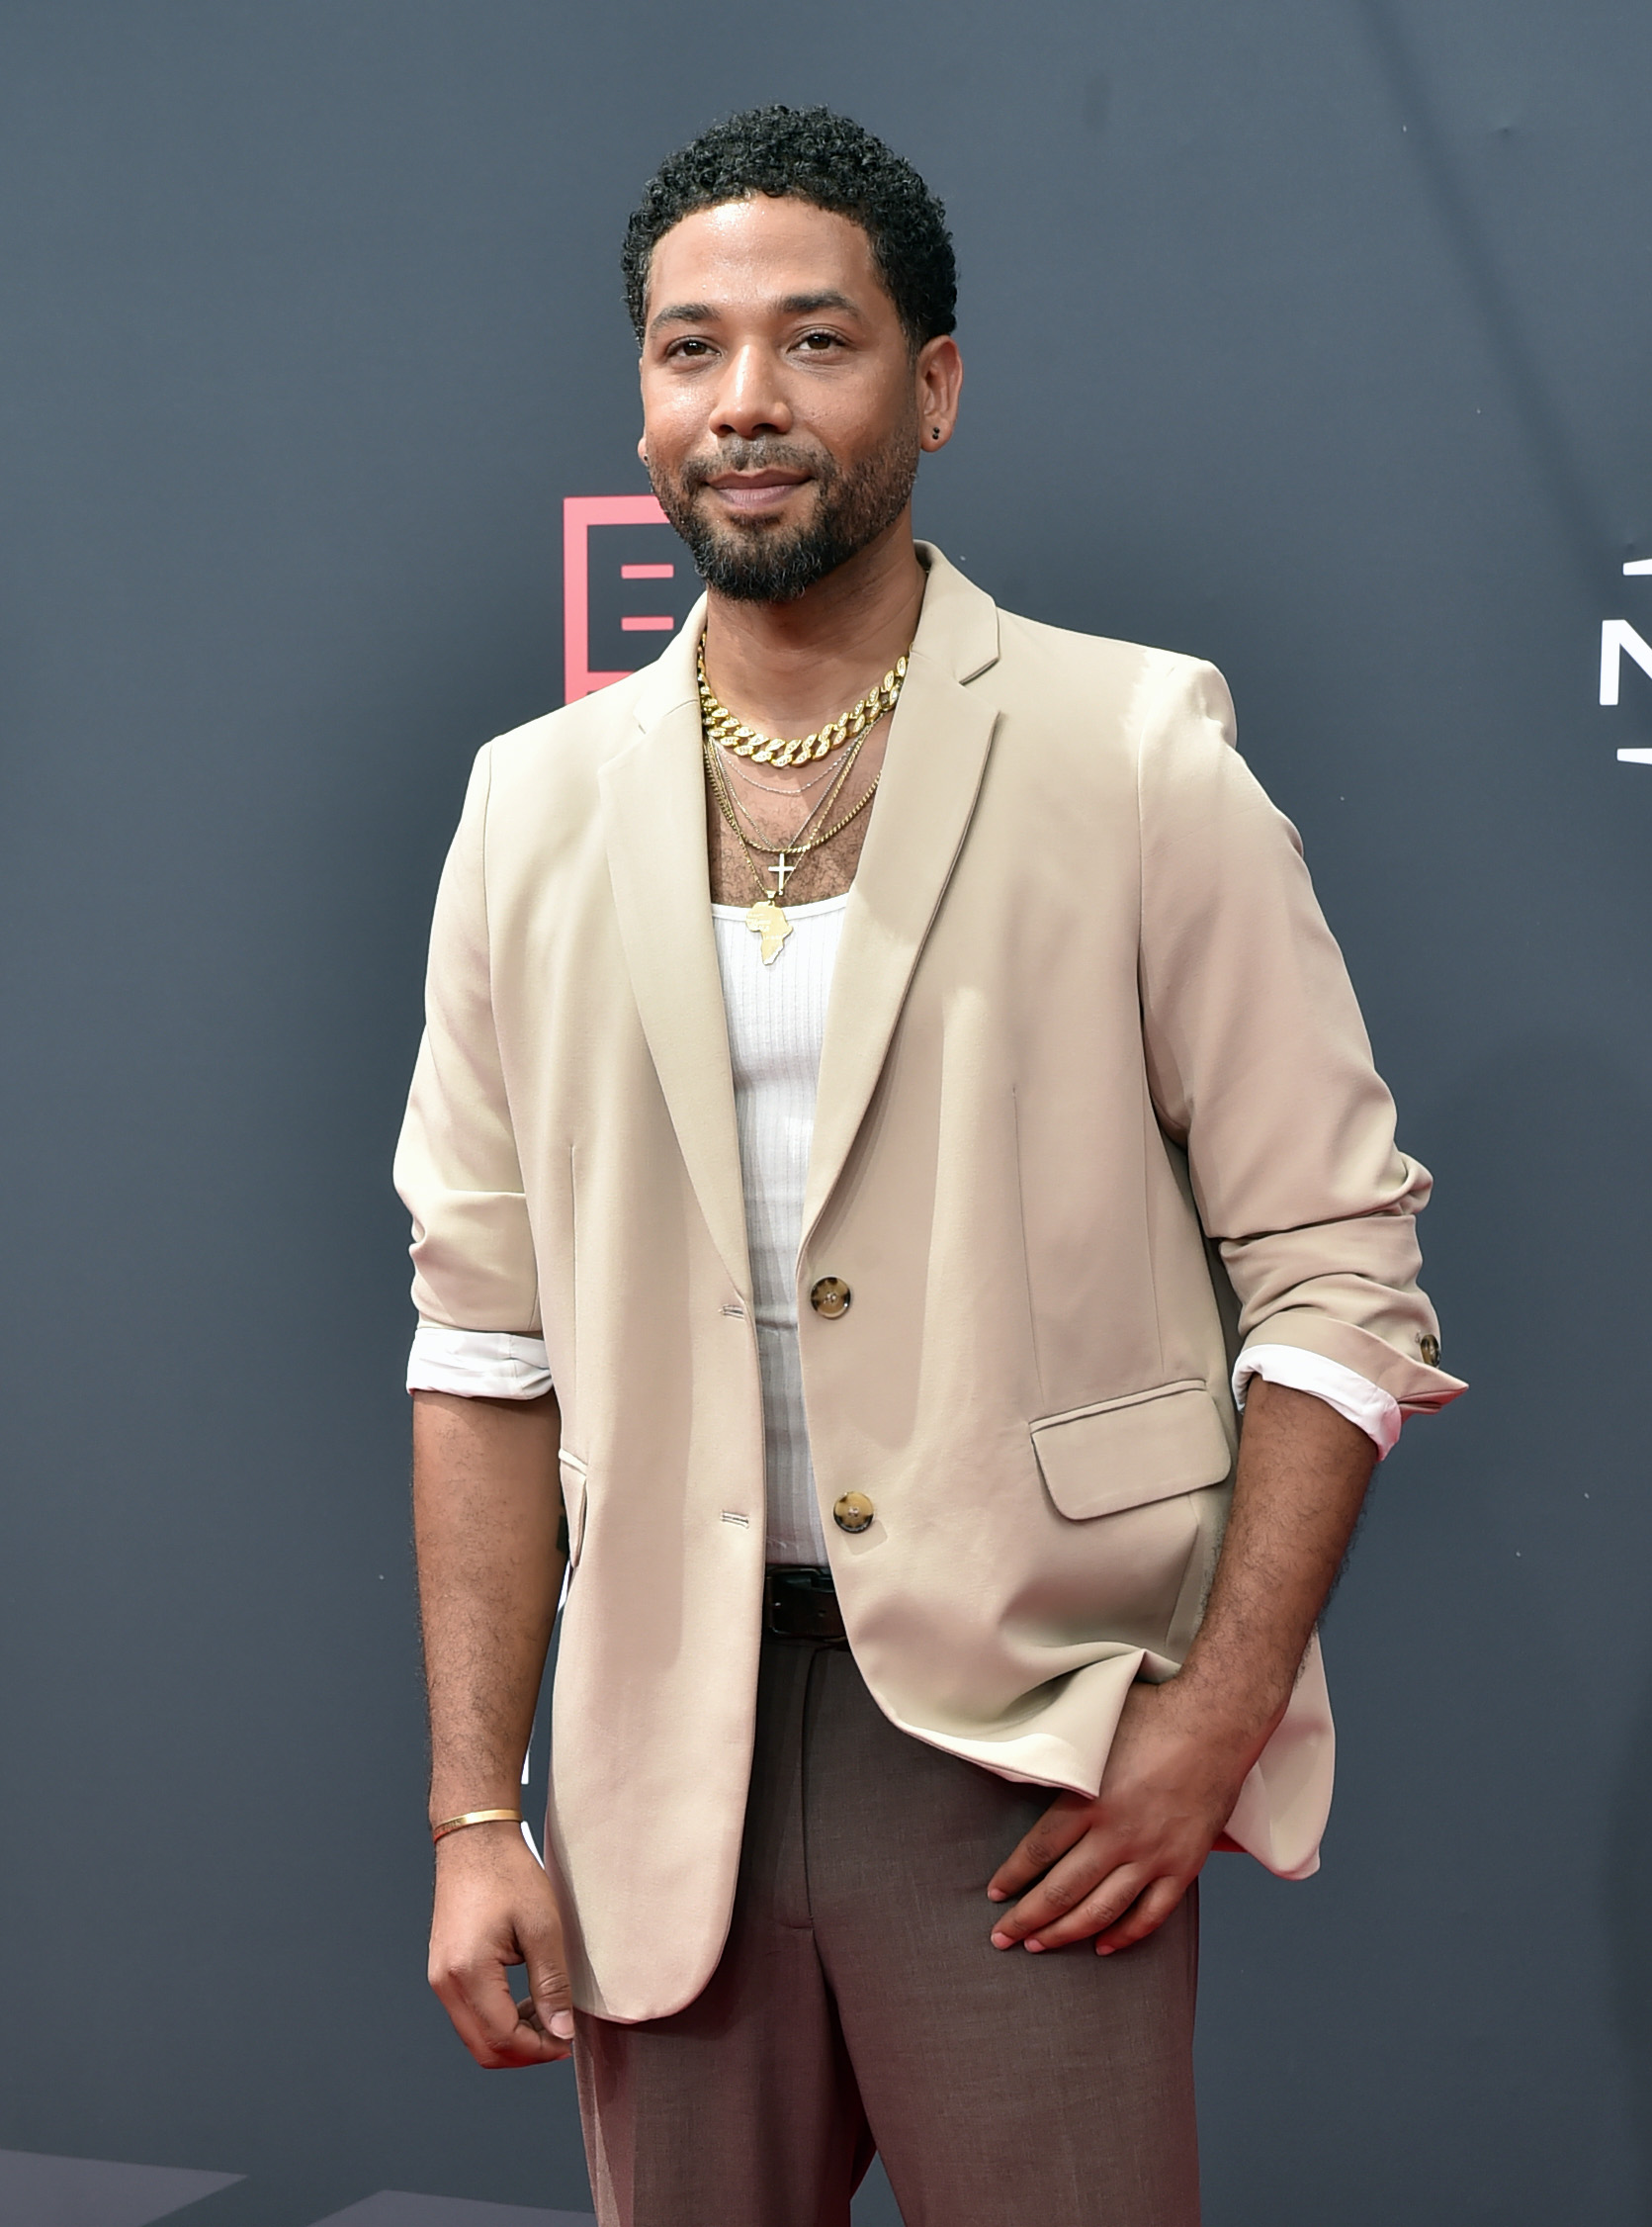 Jussie Smollett at the 2022 BET Awards on June 26, 2022, in Los Angeles. | Source: Getty Images